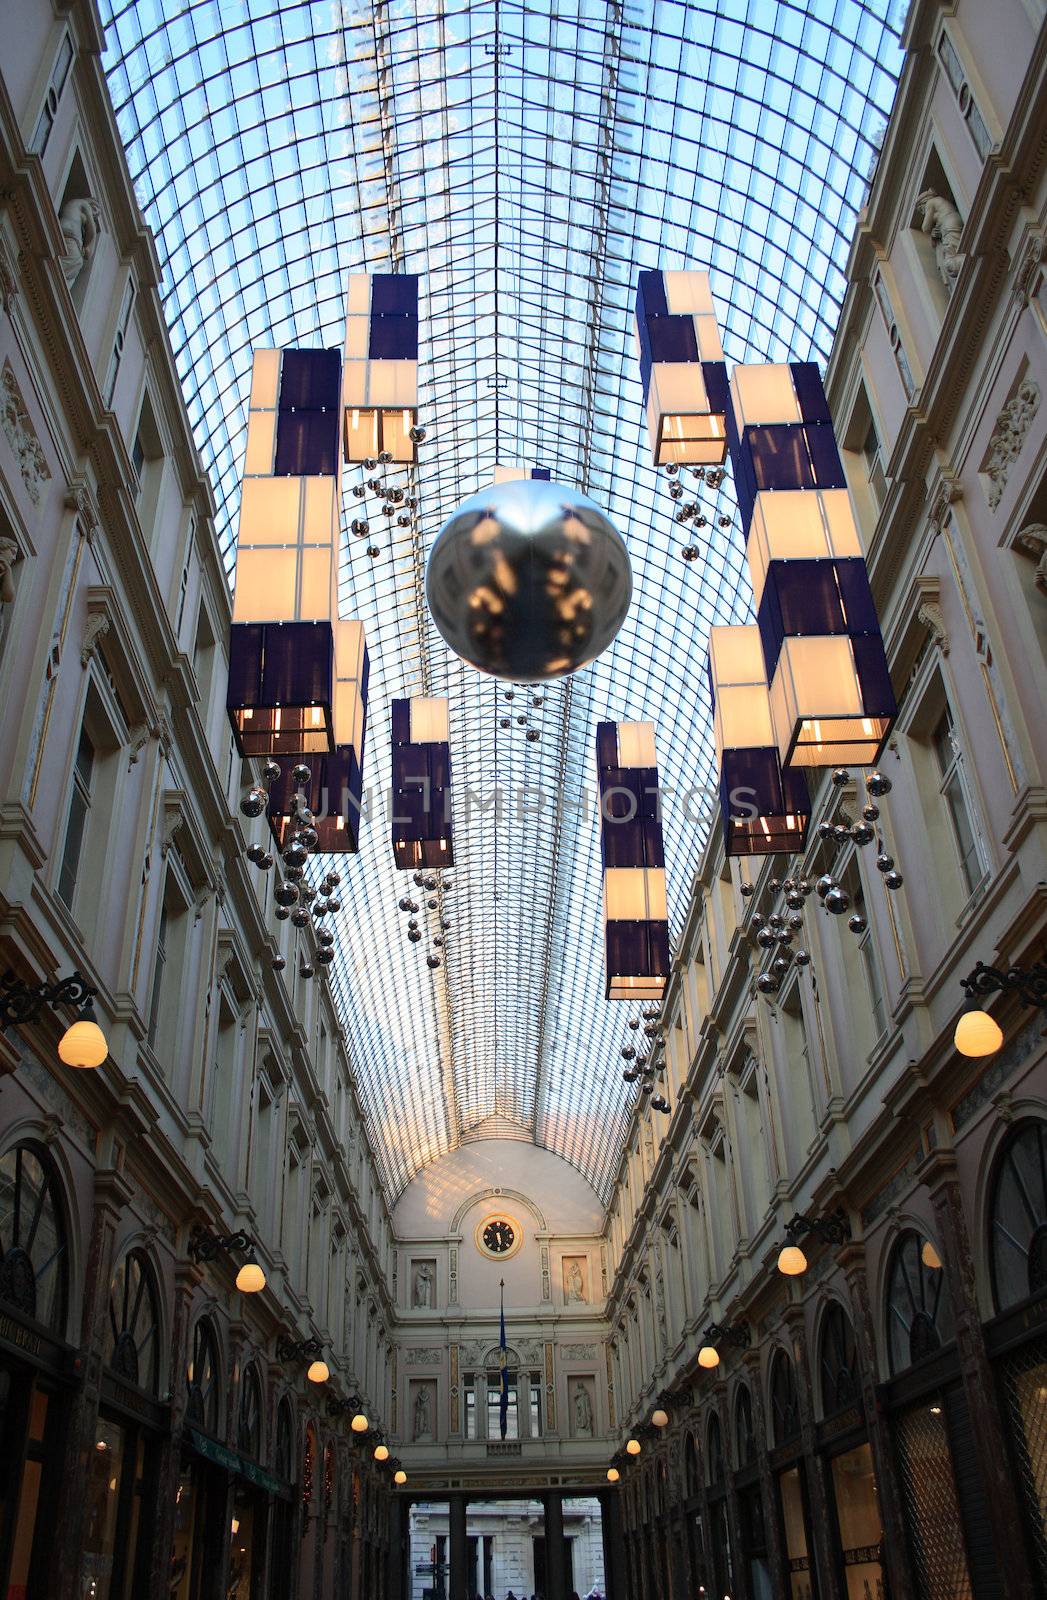 Ancient shopping galleria with modern details under glass roof in Brussels, Belgium